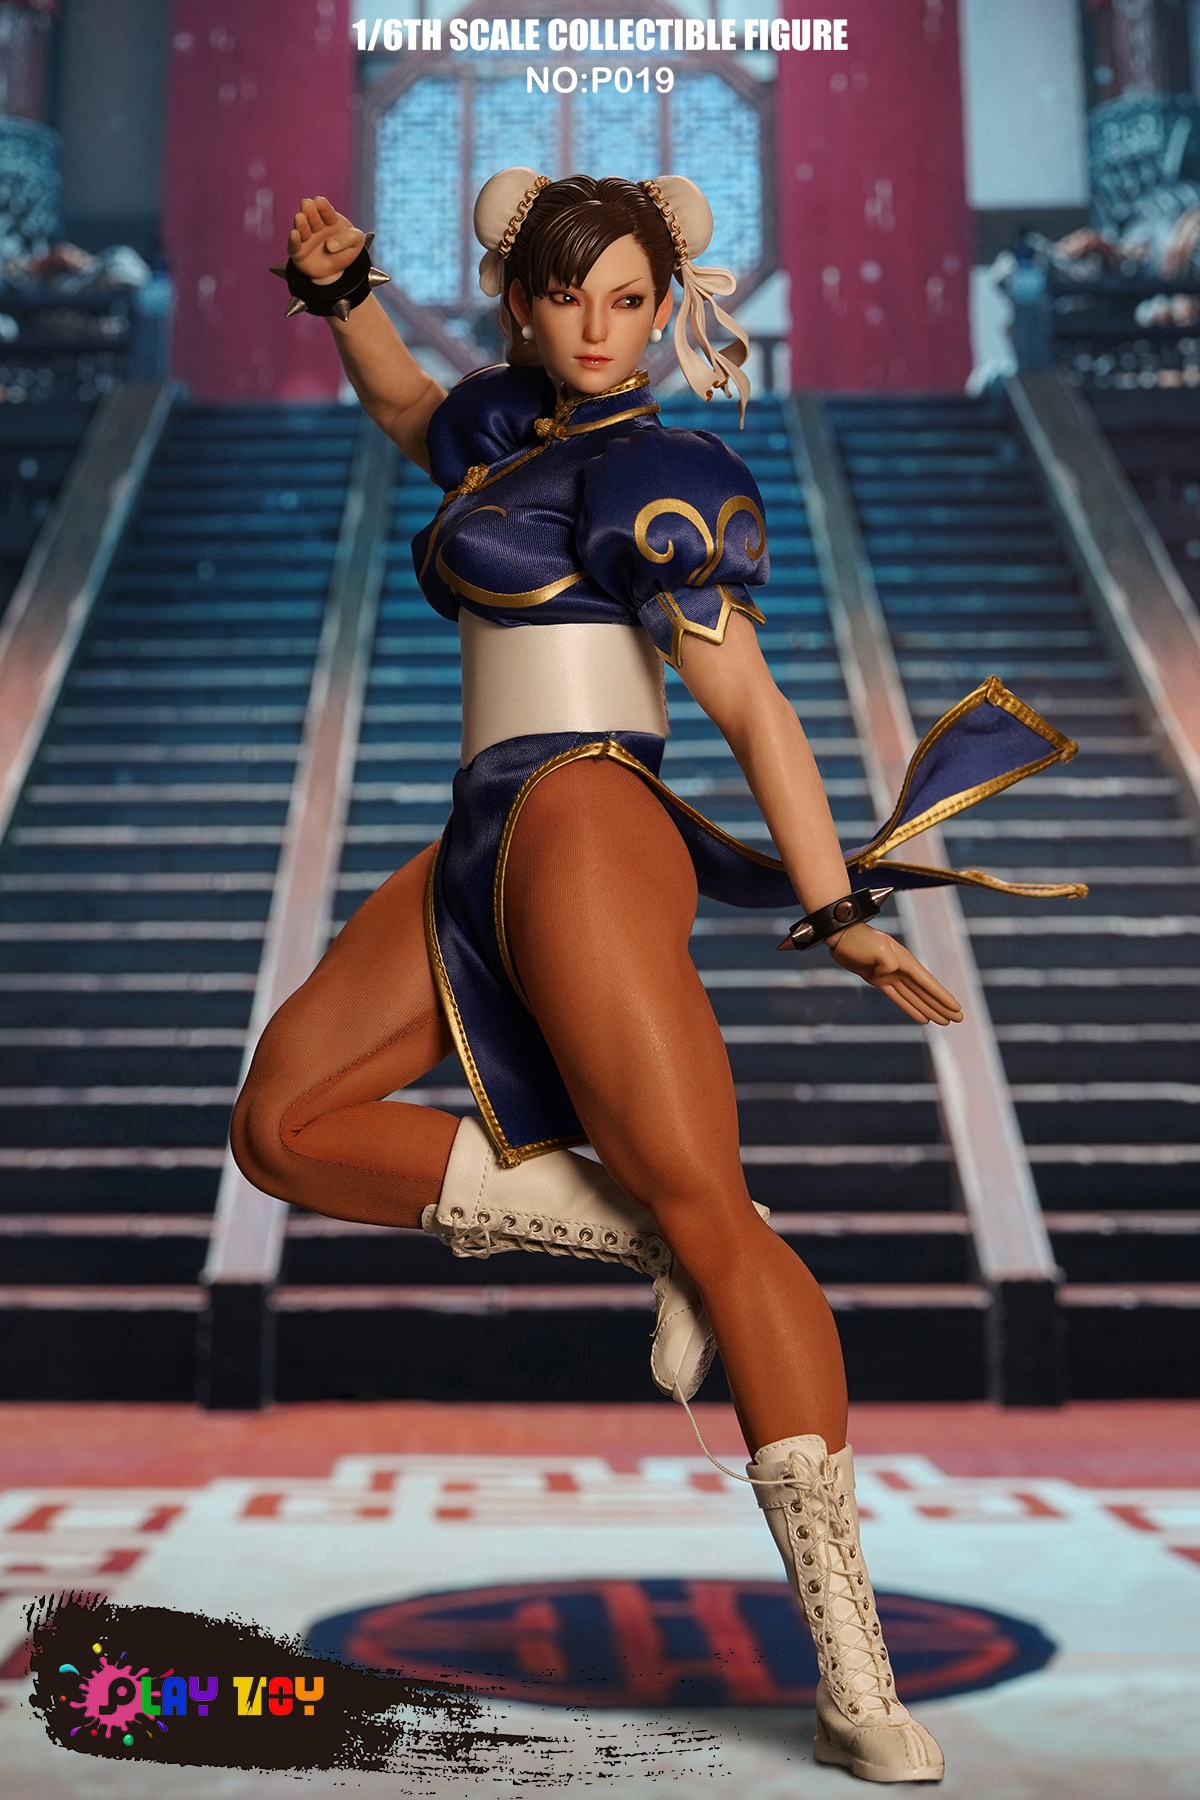 ChunLi - NEW PRODUCT: PLAY TOY - 1/6 Goddess of Fighting (NO:P019) 1265